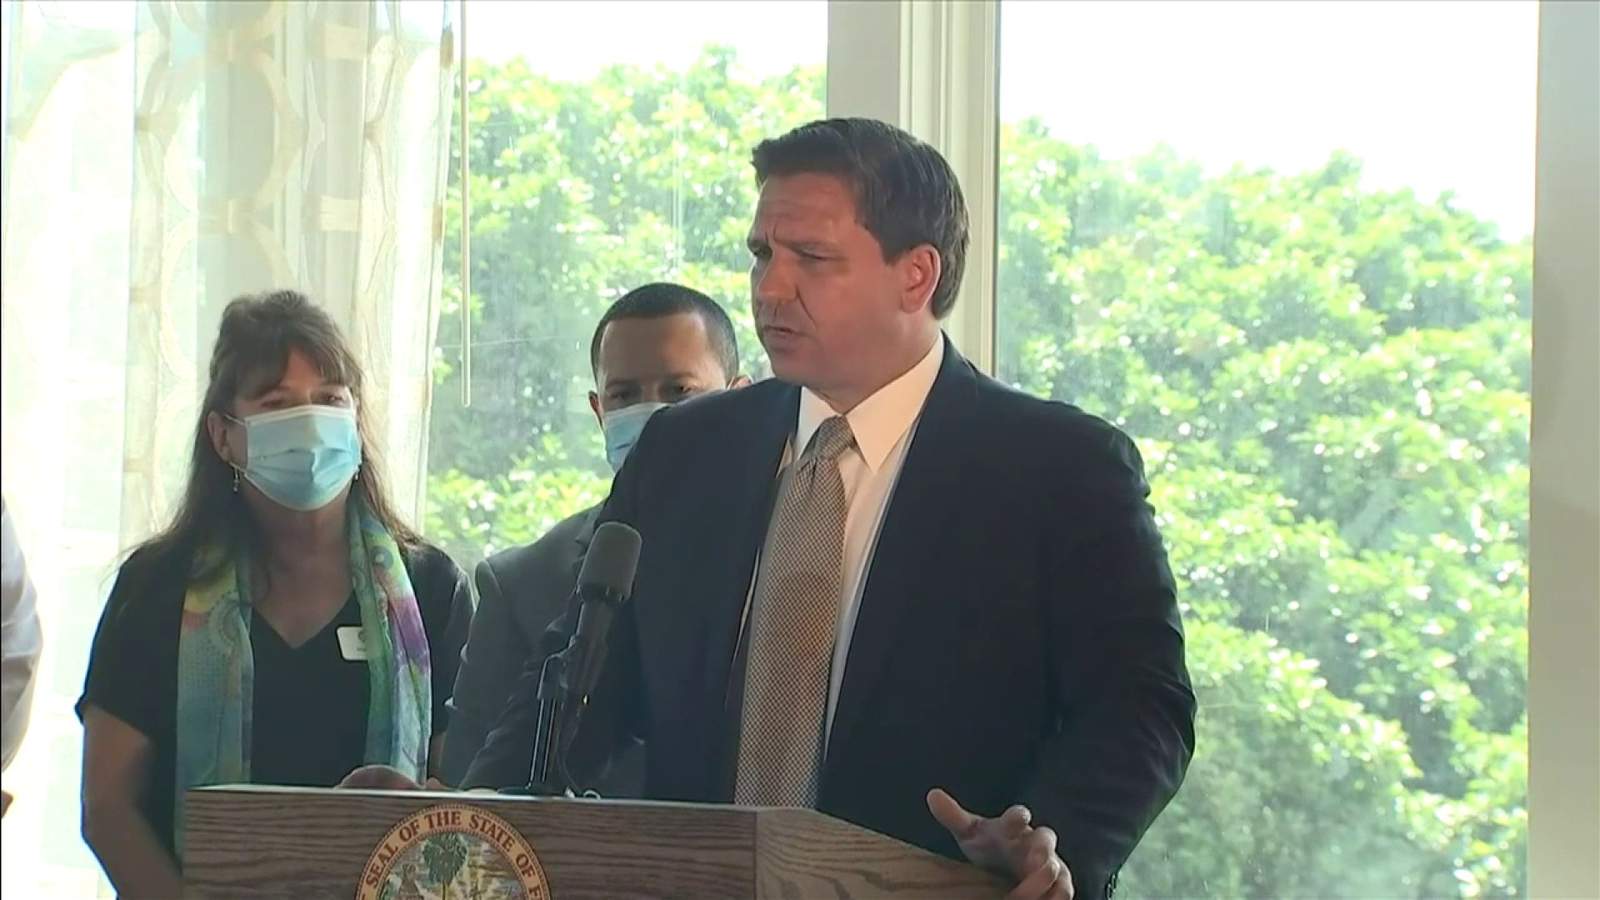 Coronavirus in Florida: Local leaders frustrated with lack of ability to fight surge in cases, seeking guidance from Gov. DeSantis